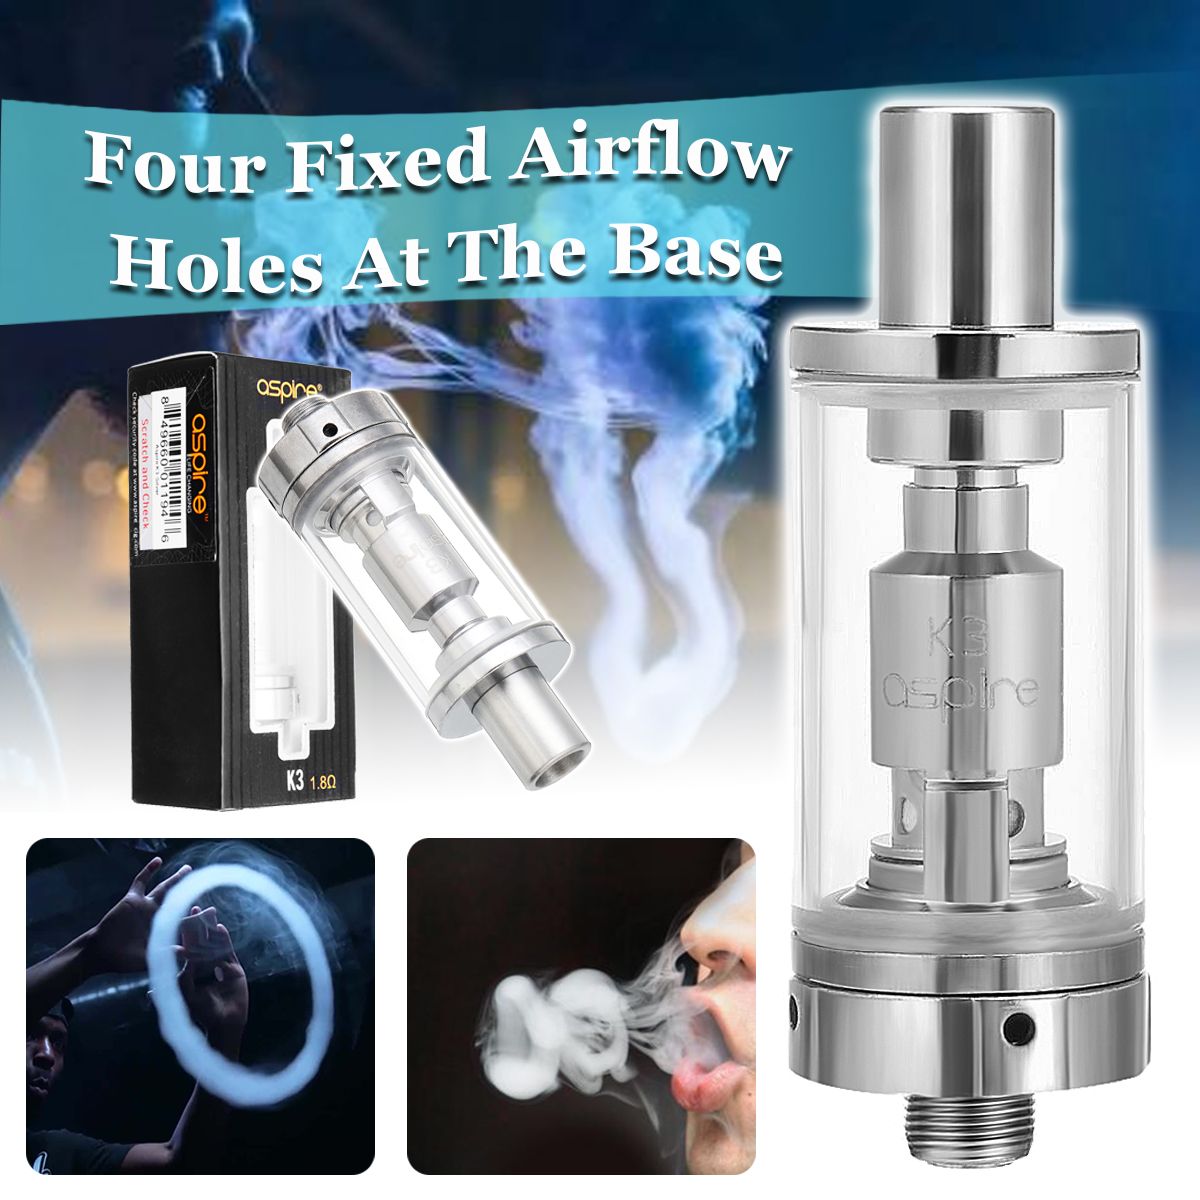 Aspire-K3-Clearomizer-Tank-2ml-TPD-Compliant-Coil-Removable-Atomizer-510-Drip-Tip-1271030